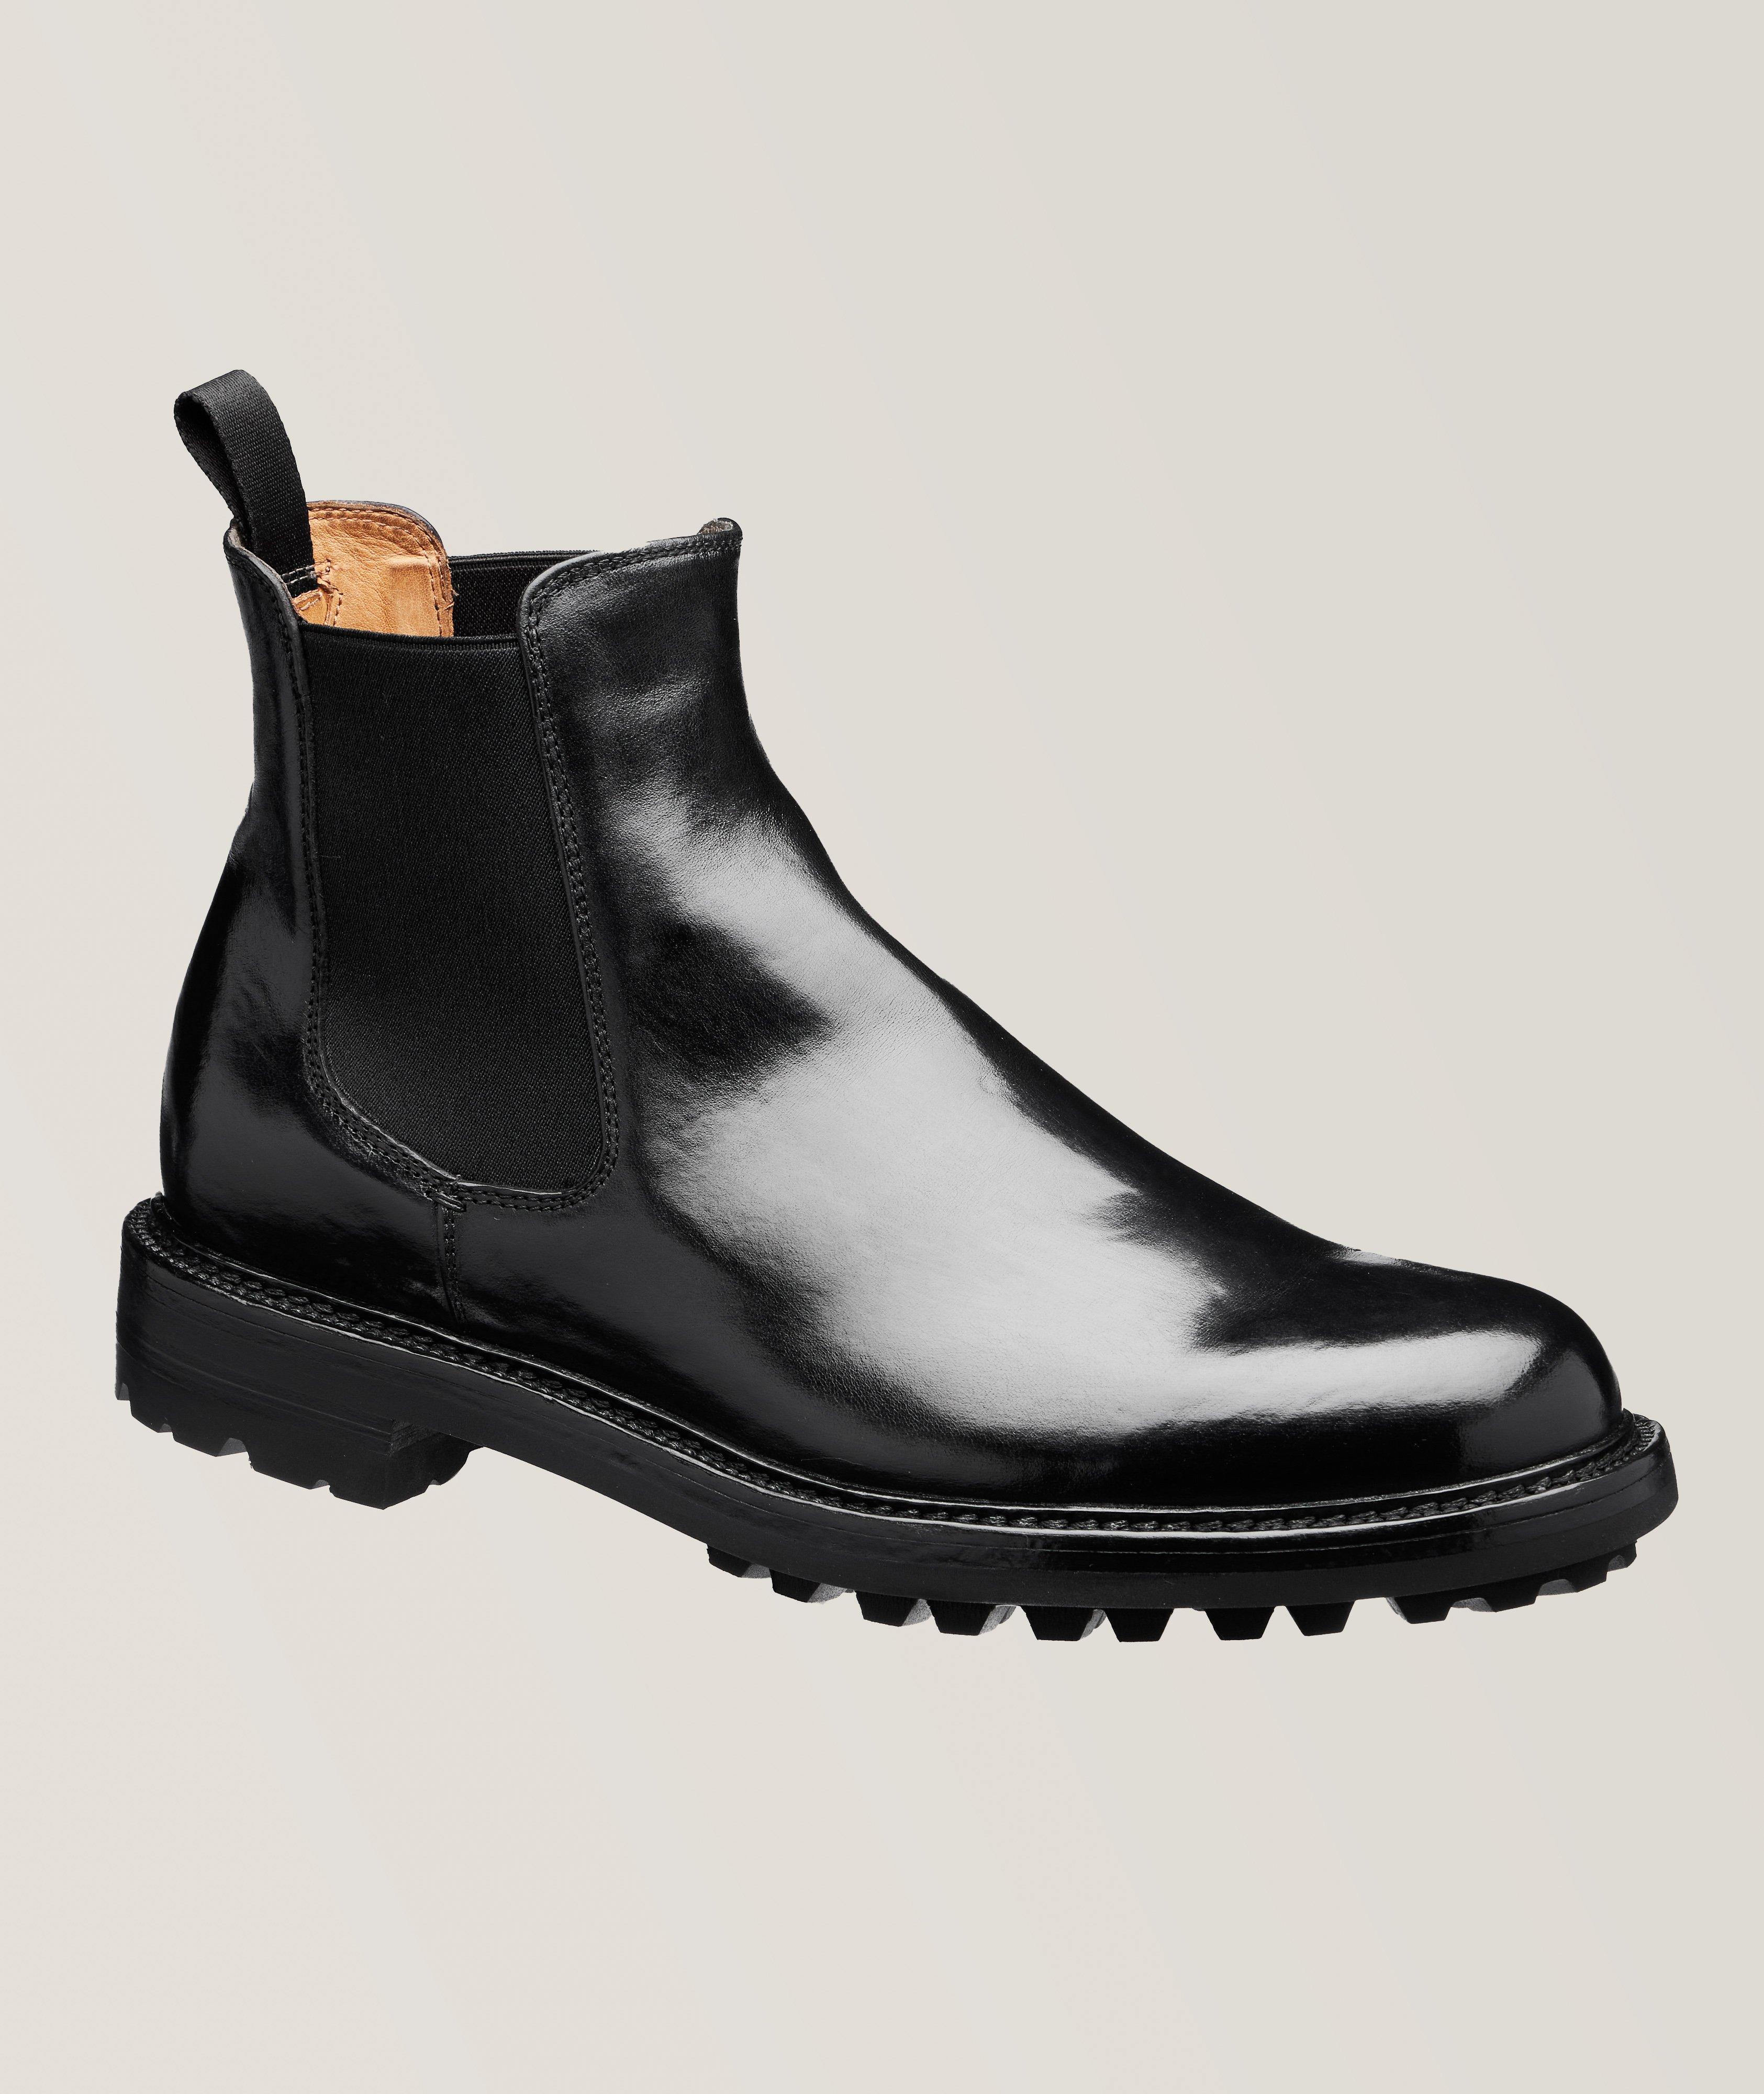 Bristol 005 Distressed Leather Chelsea Boots image 0